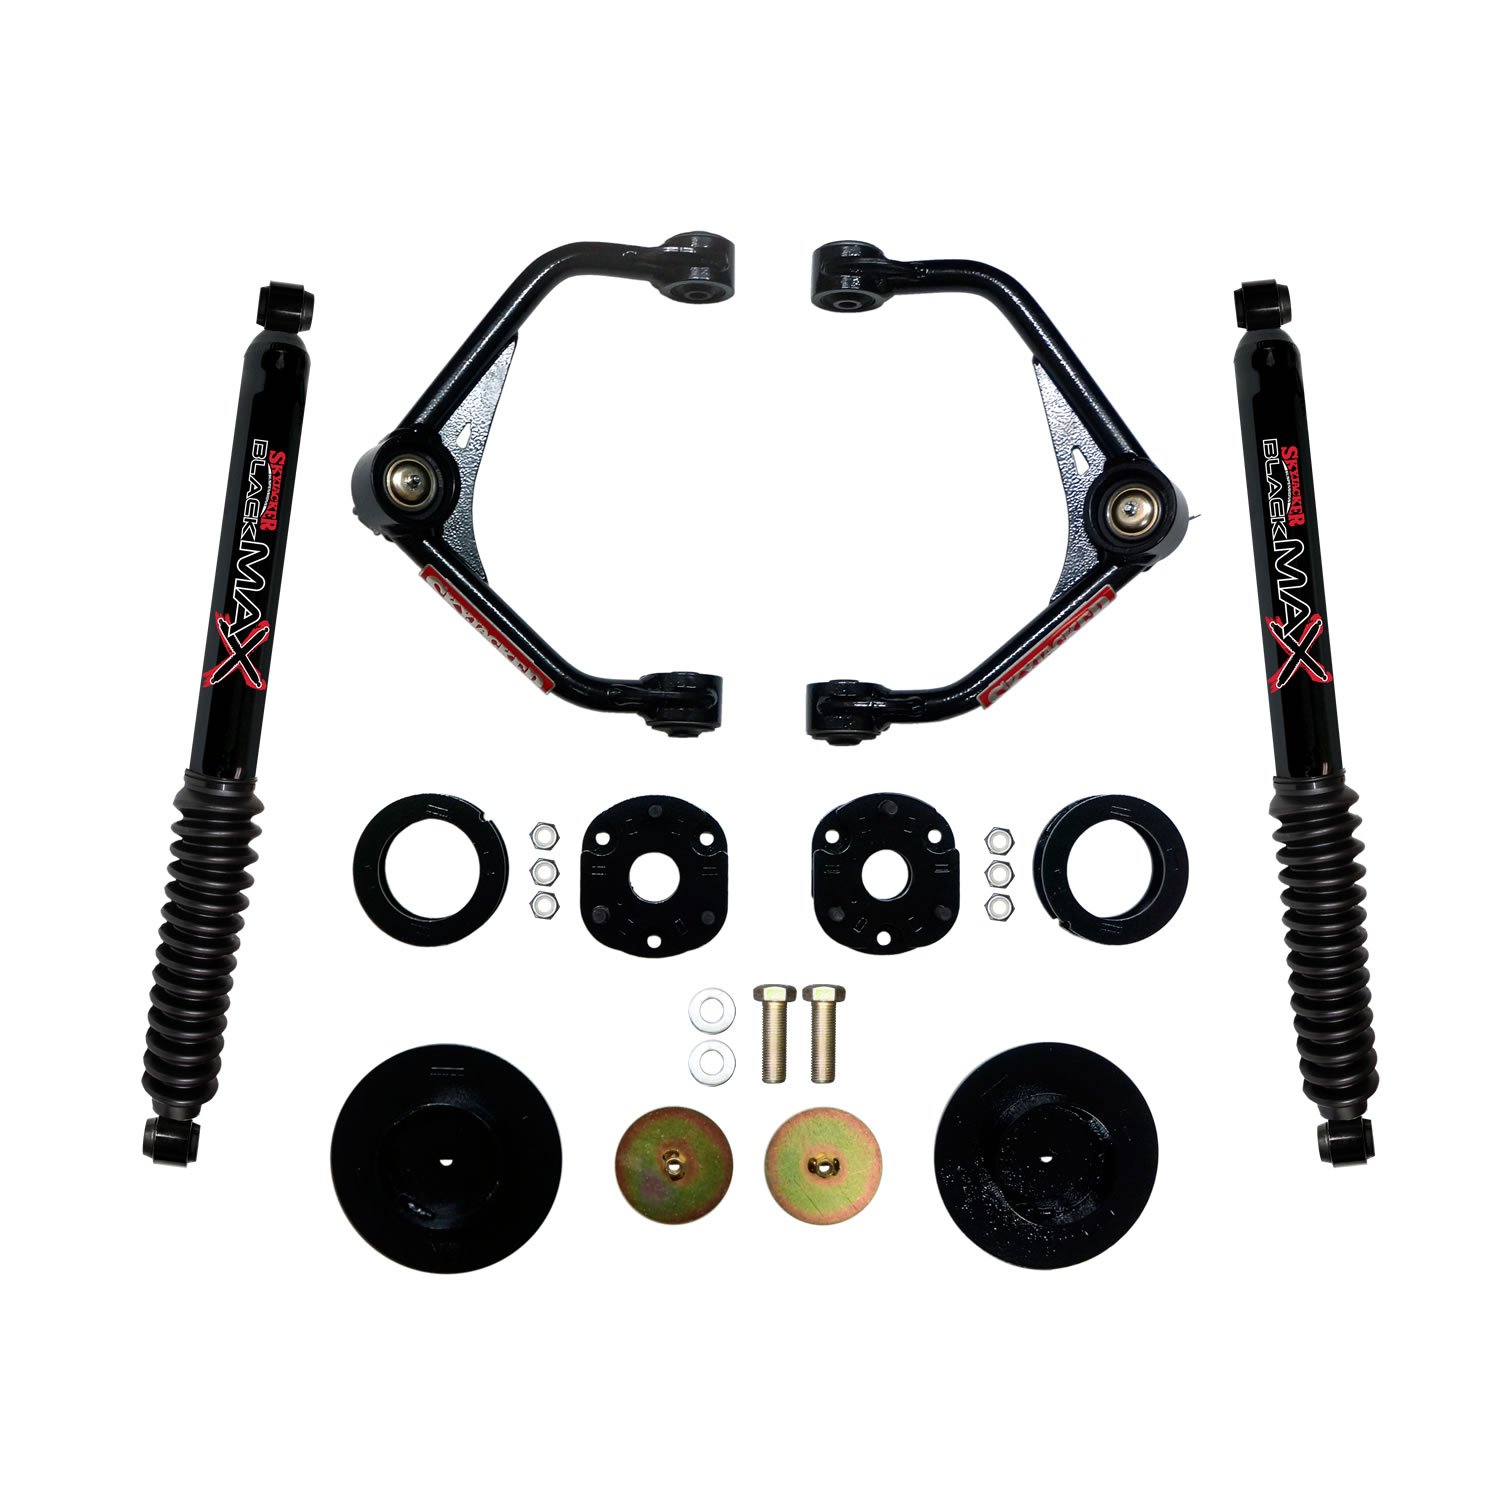 3.000 In. Upper Control Arm Lift Kit with B8500 Shocks for 2012-2018 RAM 1500